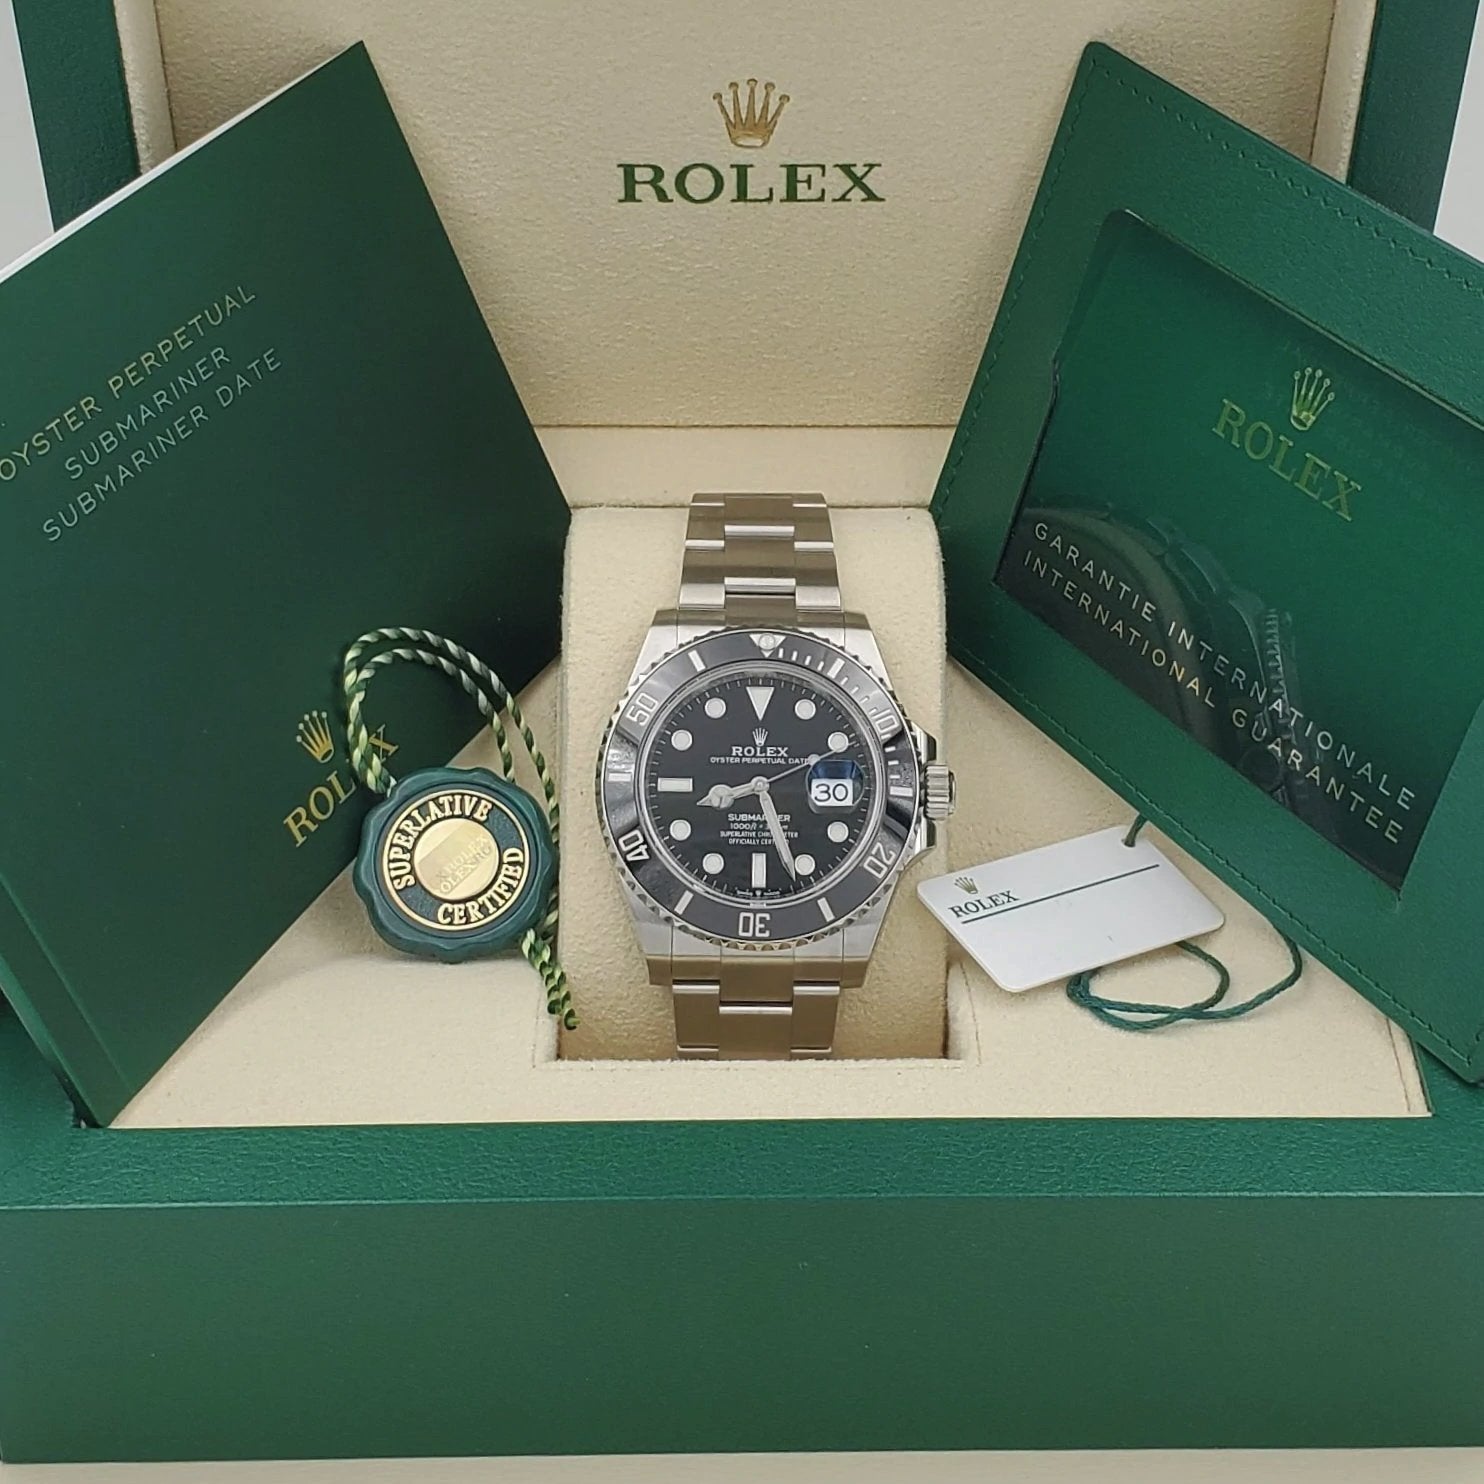 Men's Rolex 40mm Submariner Date Oyster Perpetual Stainless Steel Watch with Black Dial and Black Bezel. (Pre-Owned 116610LN)